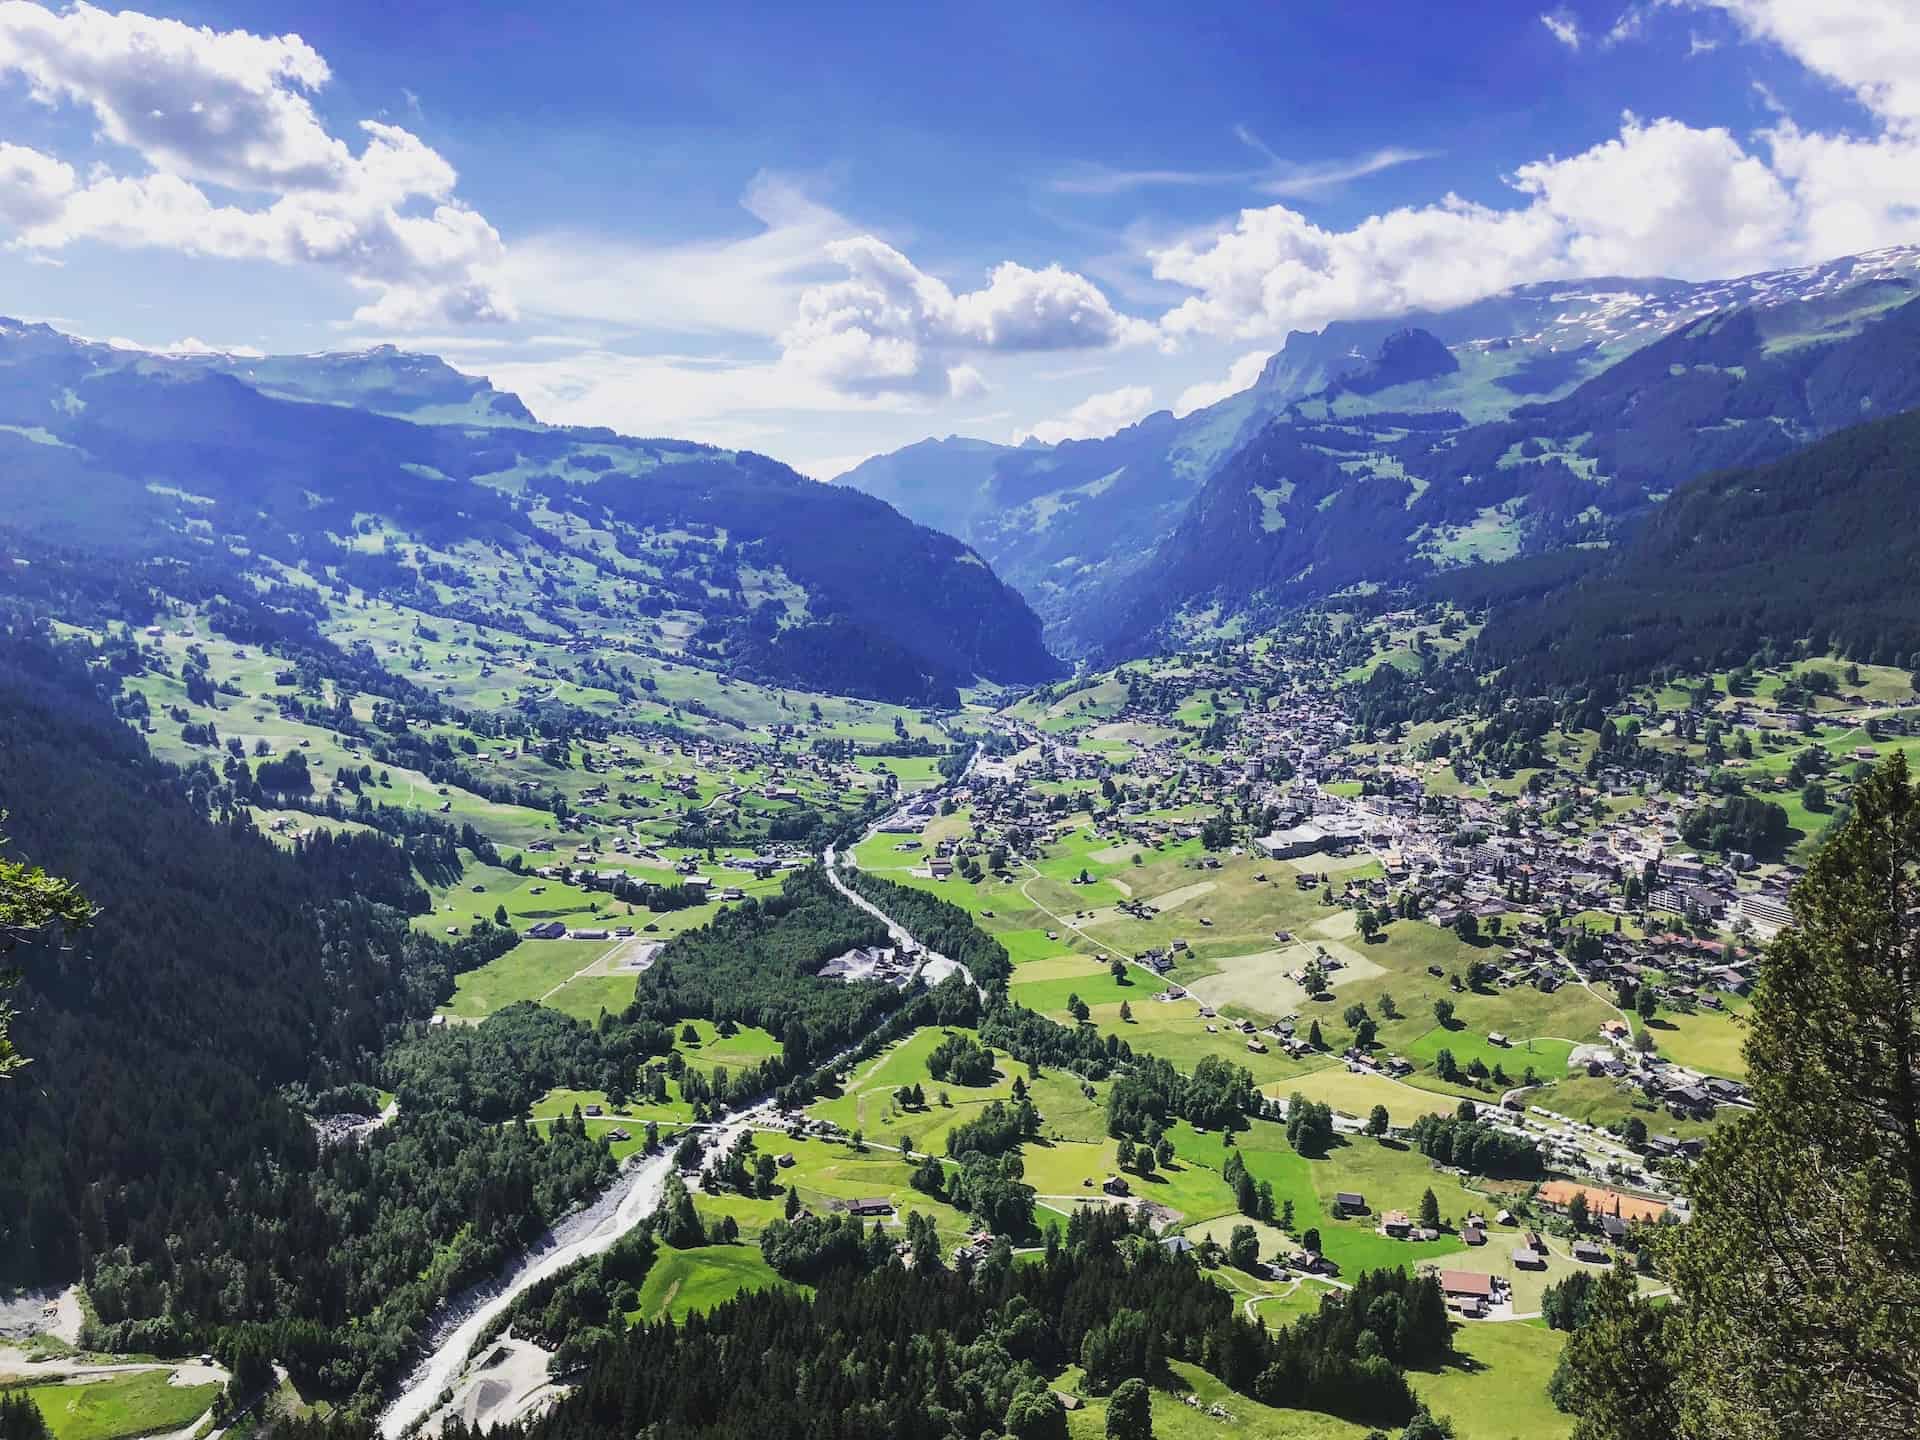 Murren, Wengen, or Grindelwald – Where to Stay in the Jungfrau